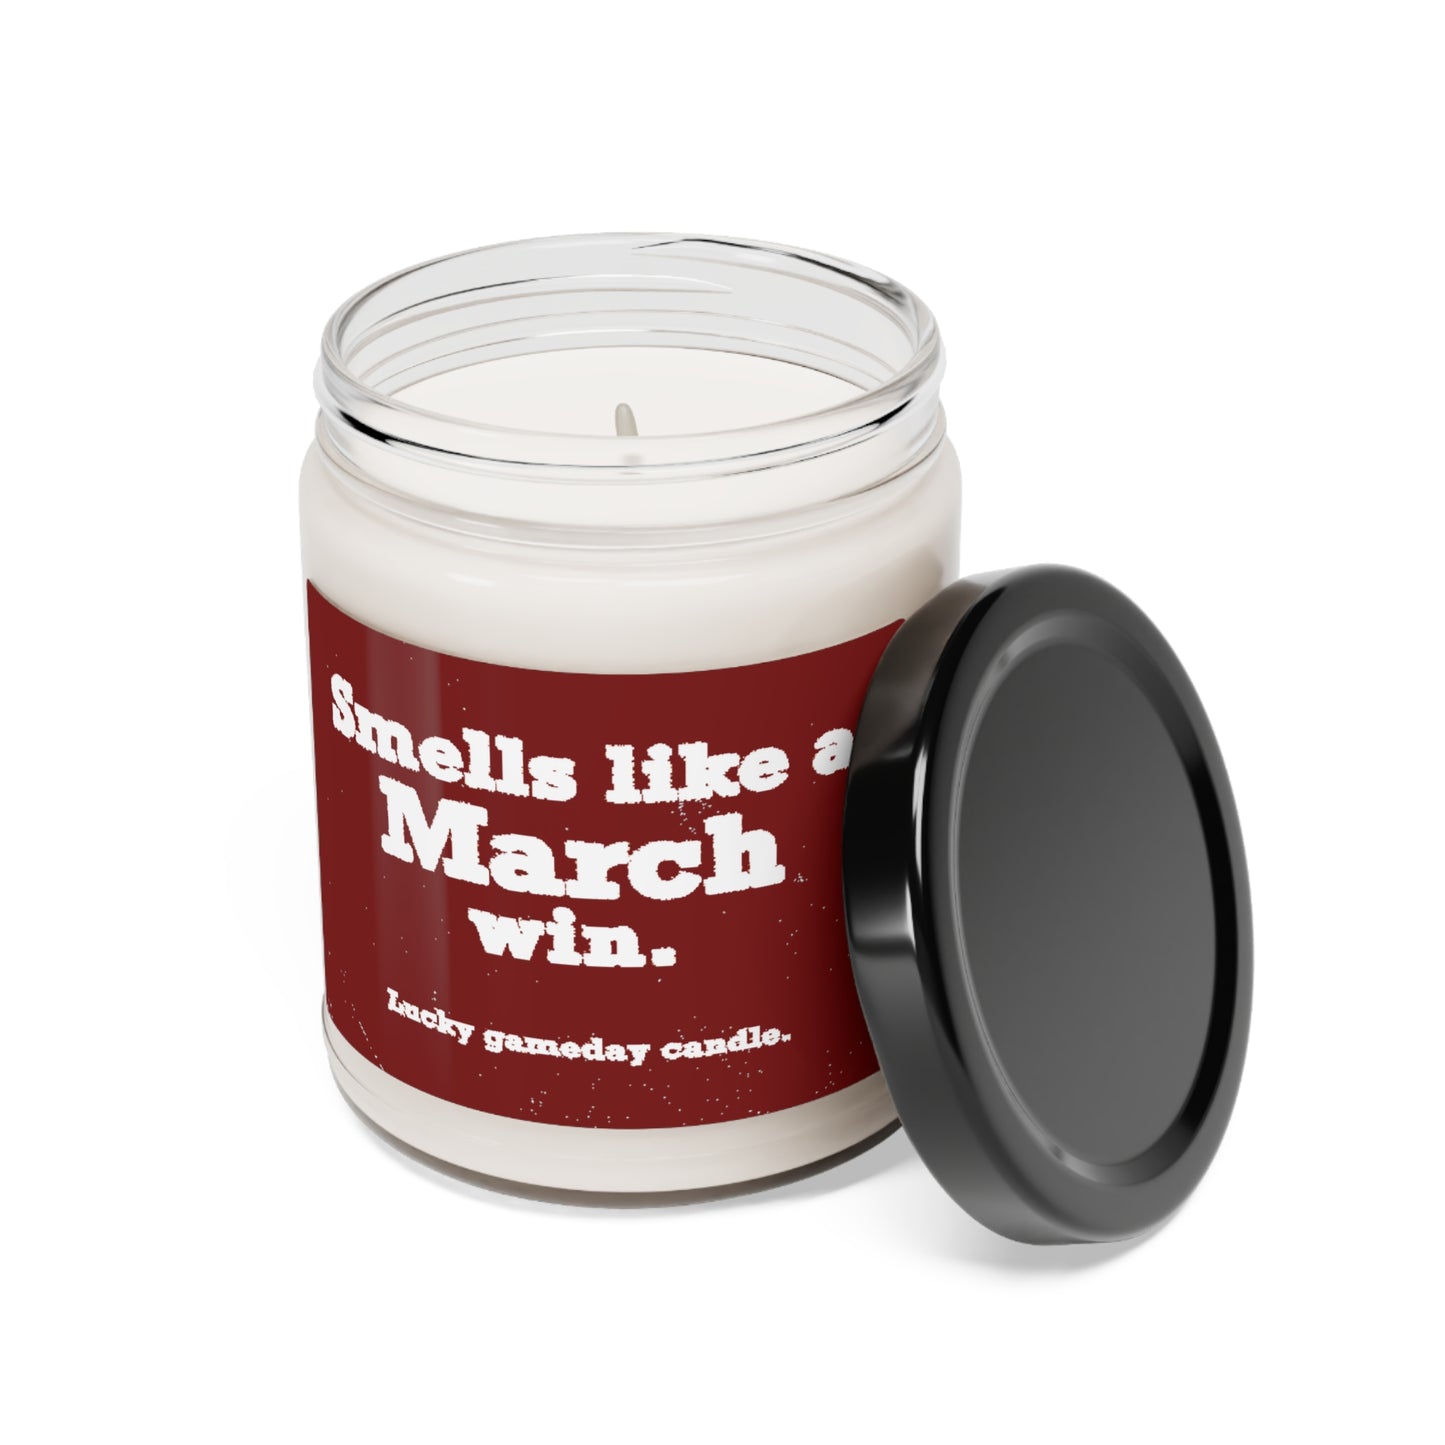 Mississippi State - "Smells Like a March Win" Scented Candle